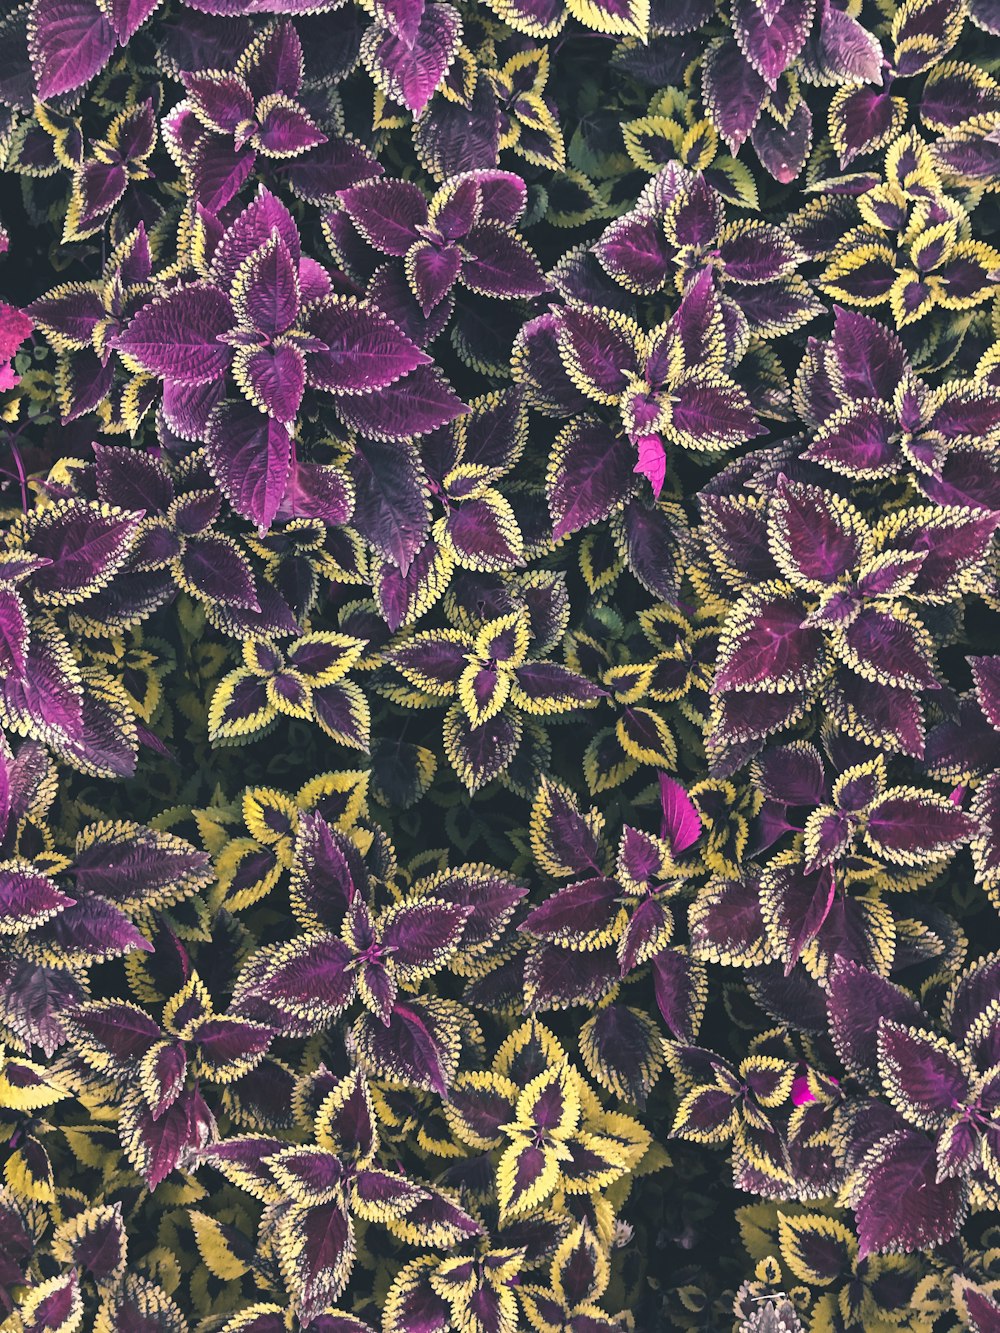 purple and green floral textile